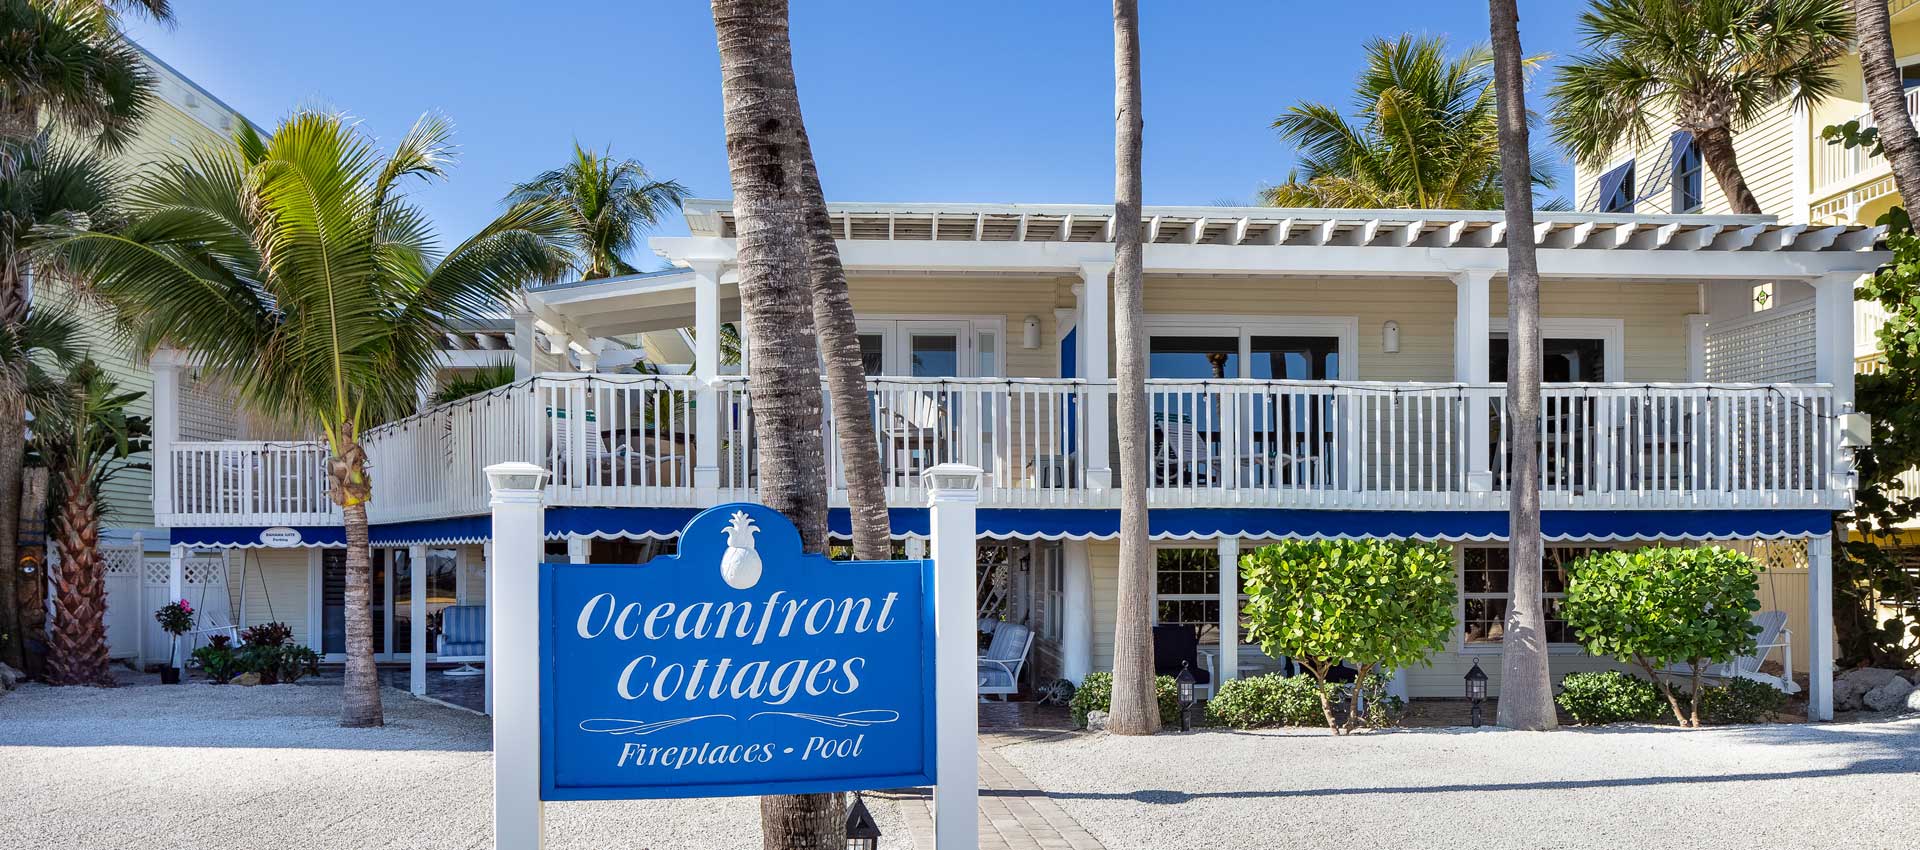 Welcome sign at Oceanfront Cottages